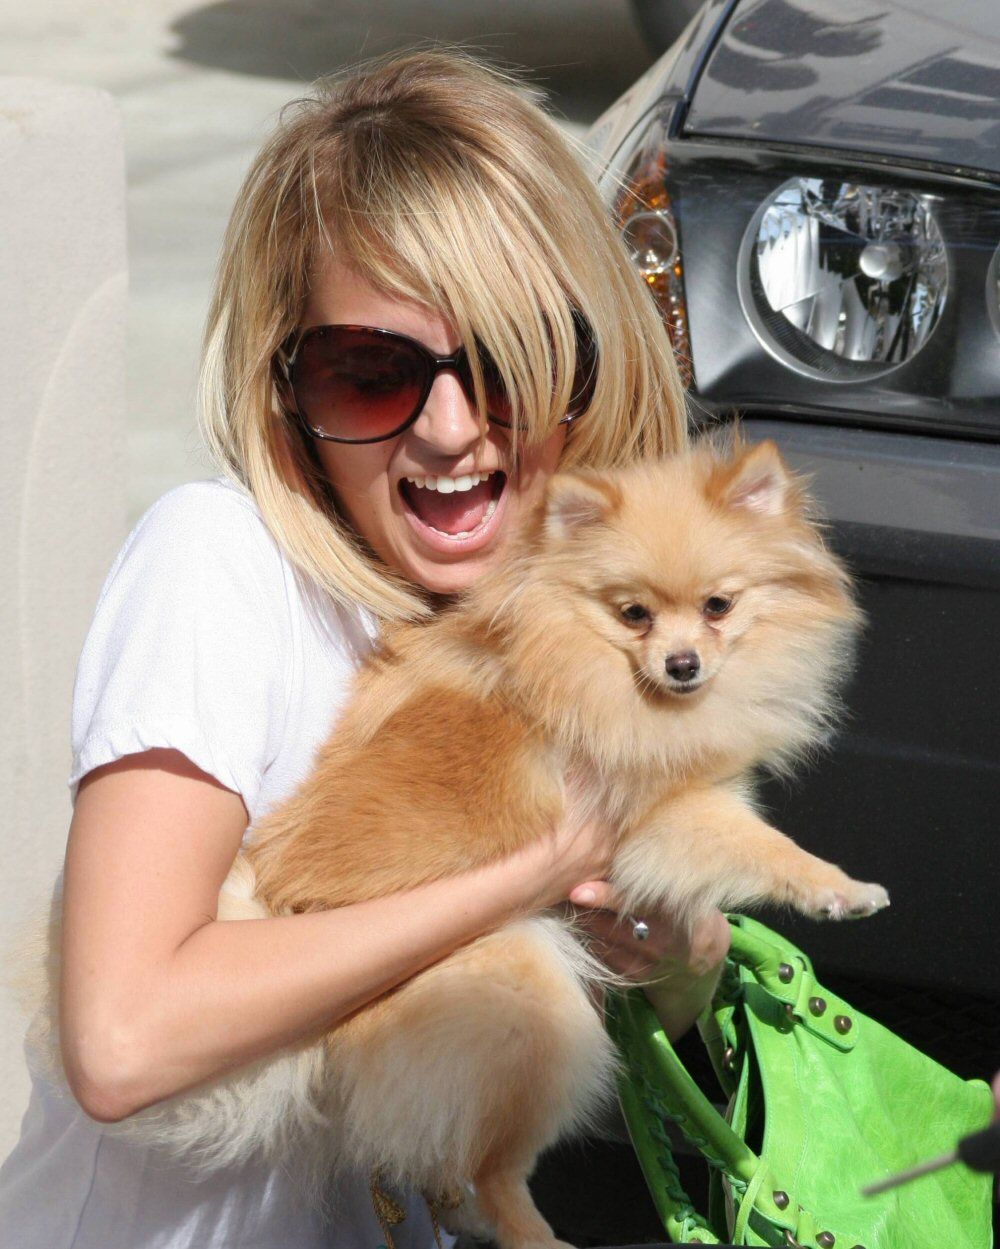 Nicole Richie walking in front of the car while carrying her Pomeranian